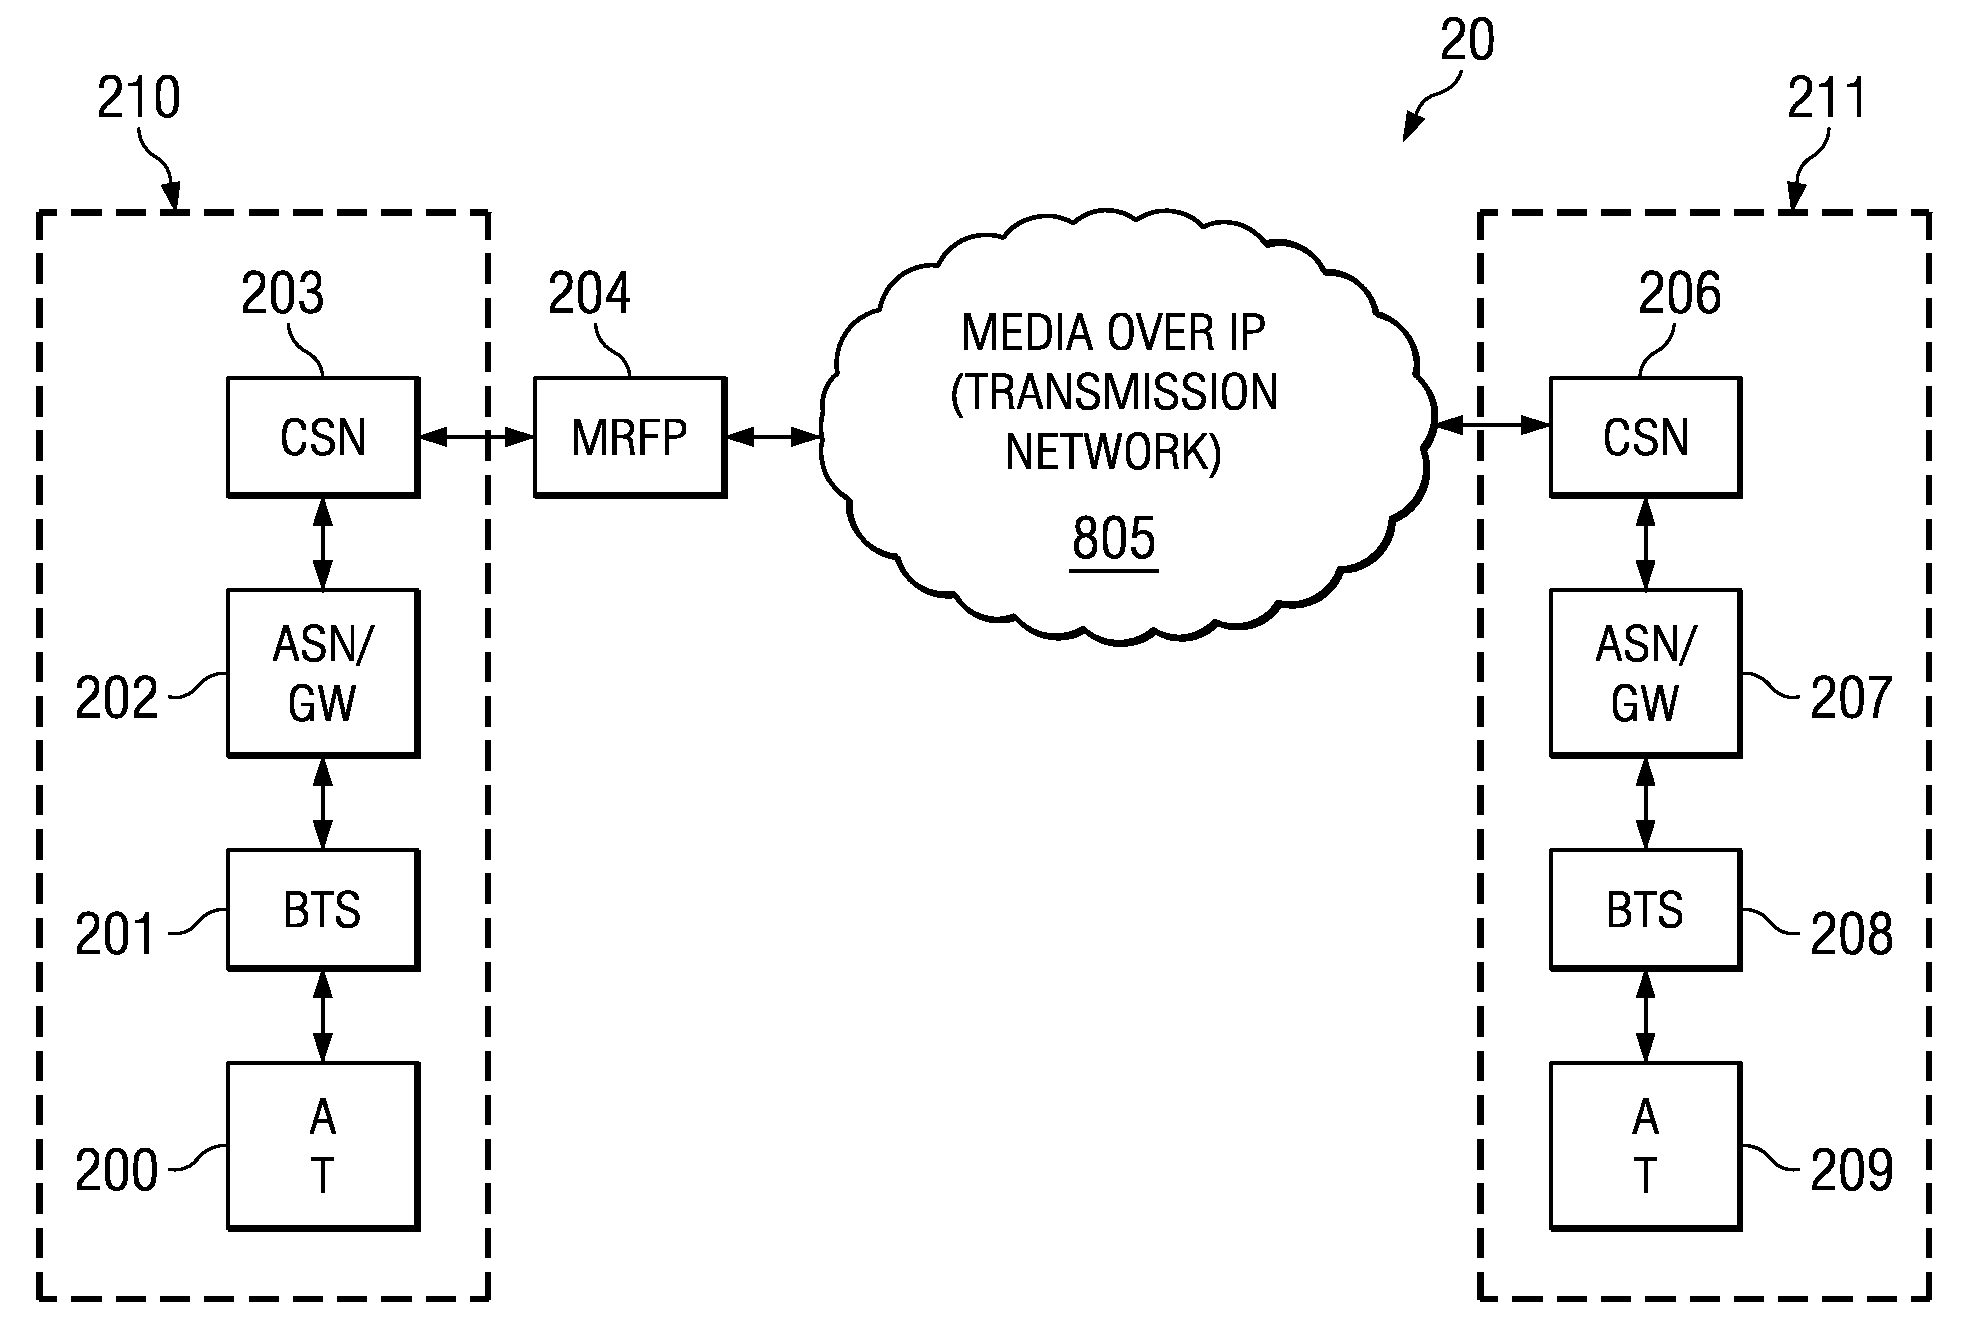 Cross-Layer Optimization of VoIP Services in Advanced Wireless Networks